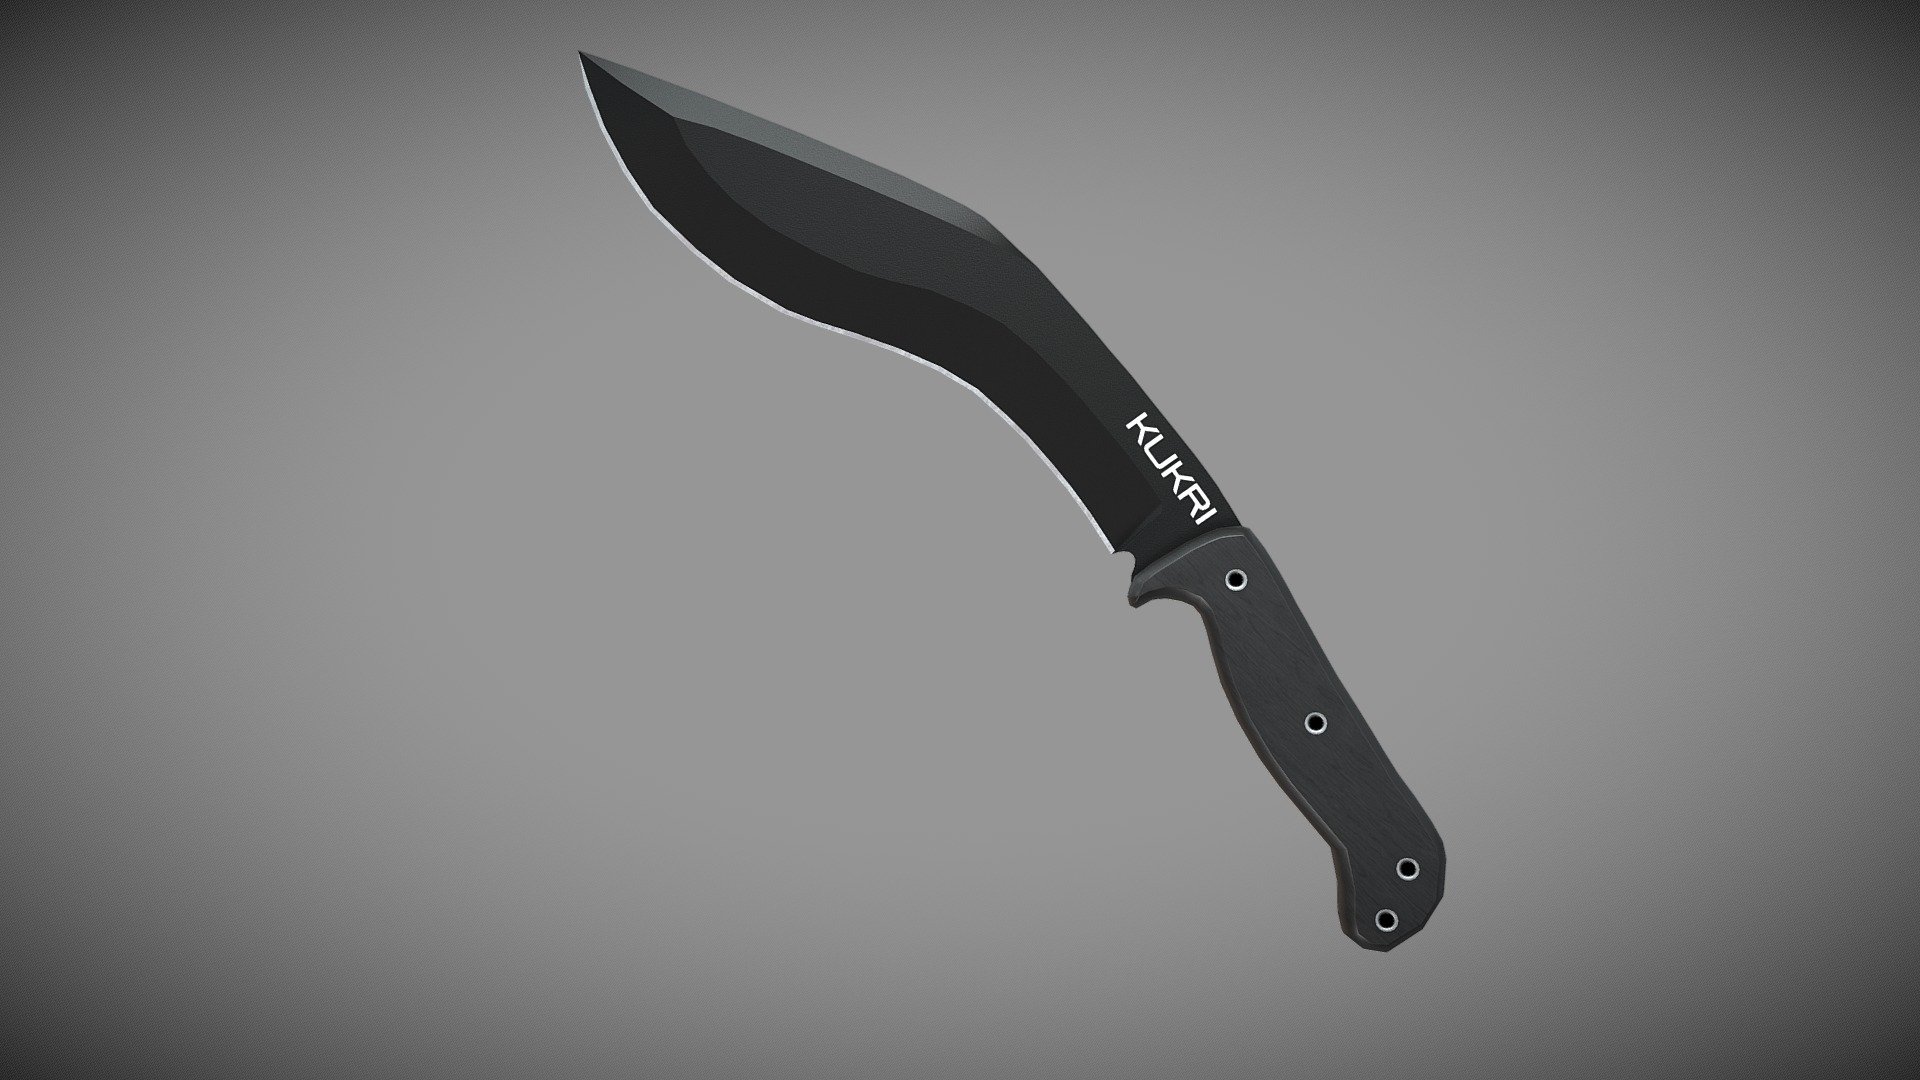 3D model made in Autodesk Maya 2020 and textured in Substance Painter.
- Texture size: 2048x2048
- Included formats: Low/High Poly .fbx
- Rigged
- Game ready - Kukri Knife - Buy Royalty Free 3D model by P7PO (@PiPo07) 3d model